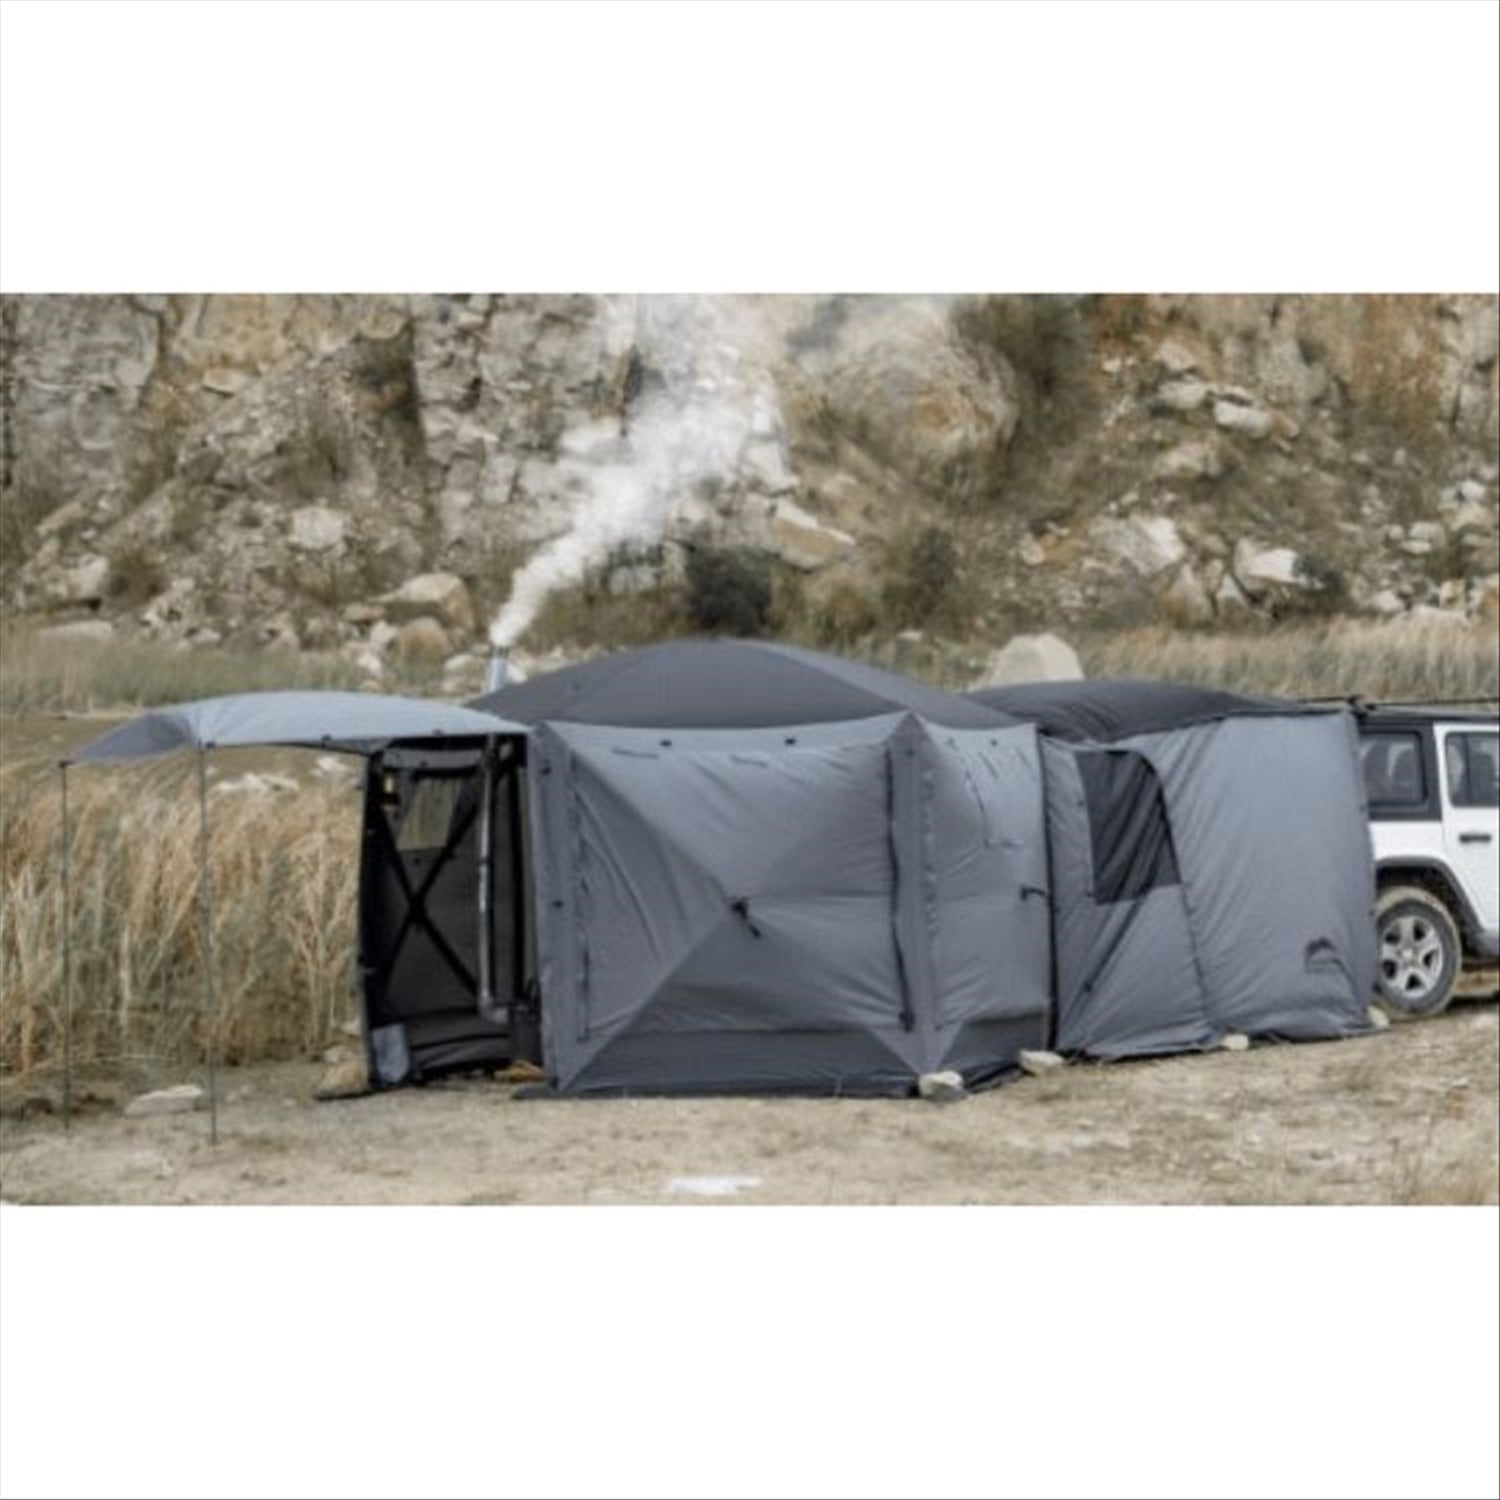 Wild Land Wild Land Hub 600 Lux Tent with floor and veicle connector